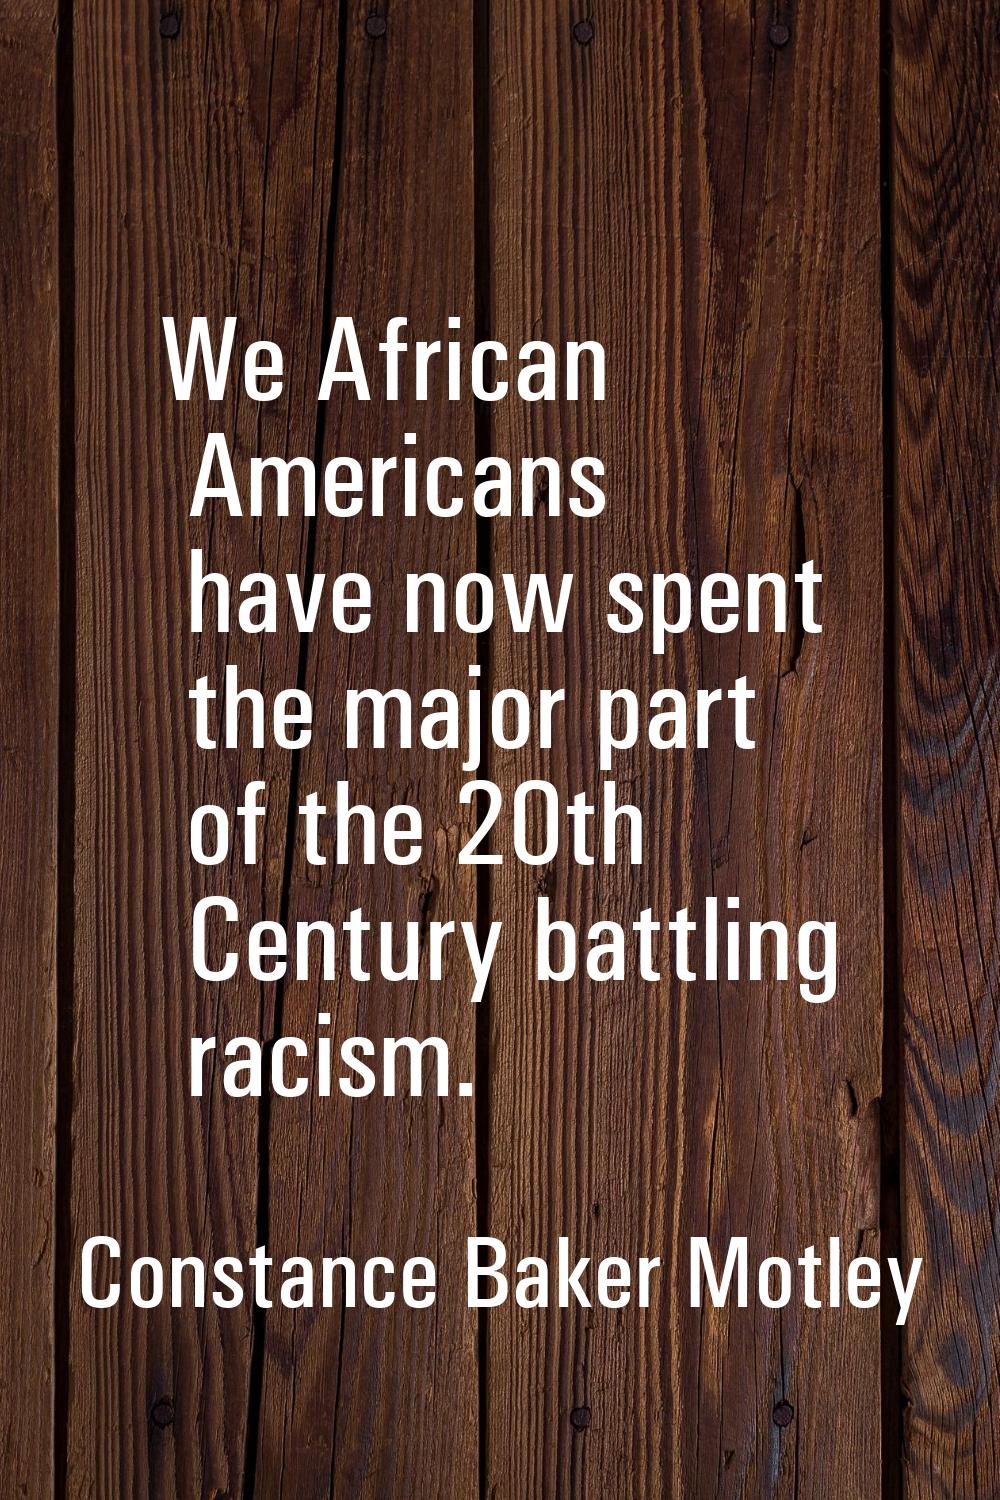 We African Americans have now spent the major part of the 20th Century battling racism.